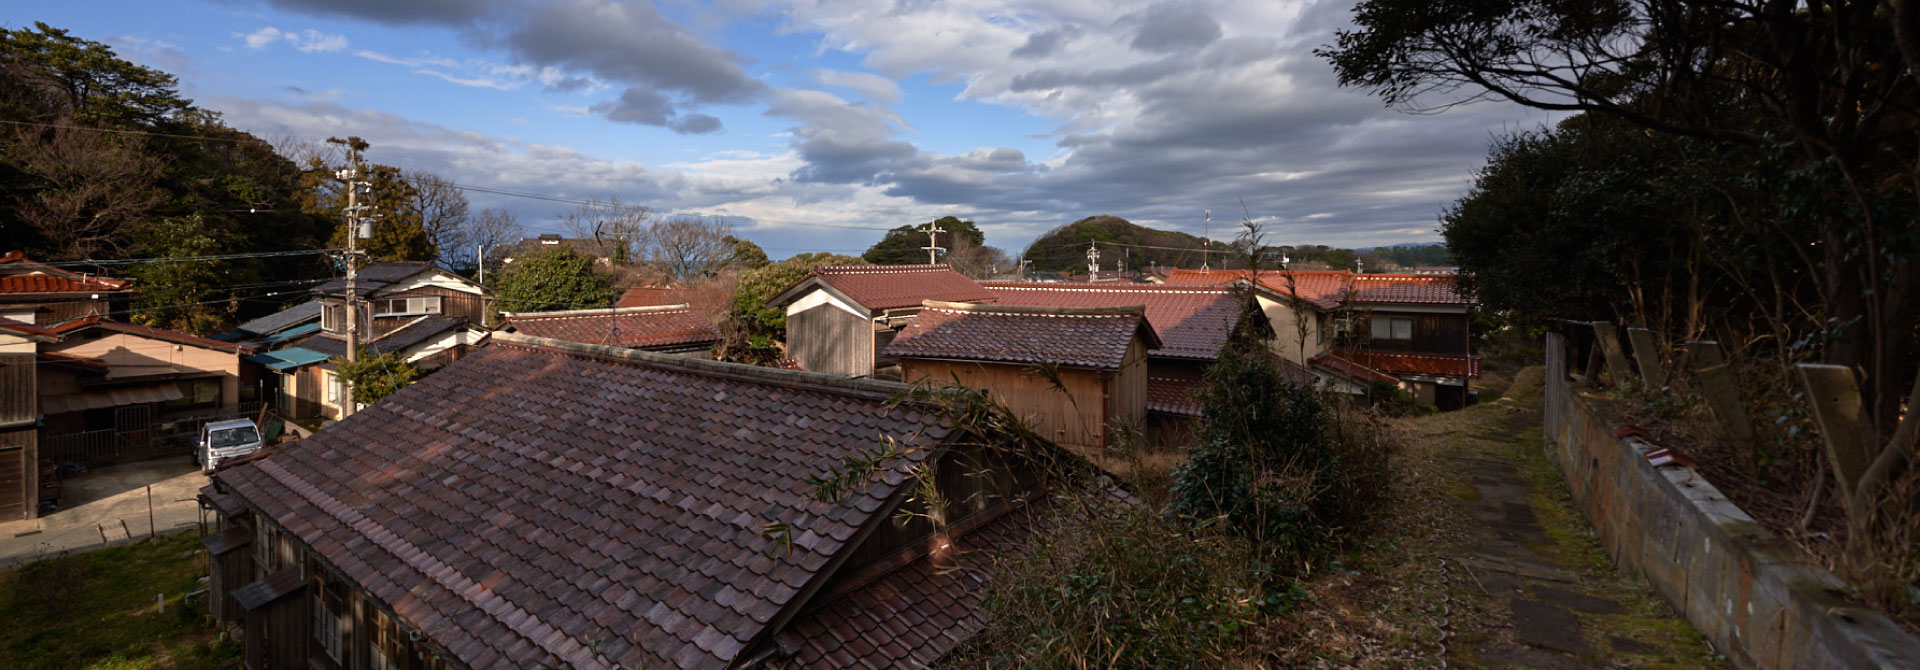 Red-tile roof houses 